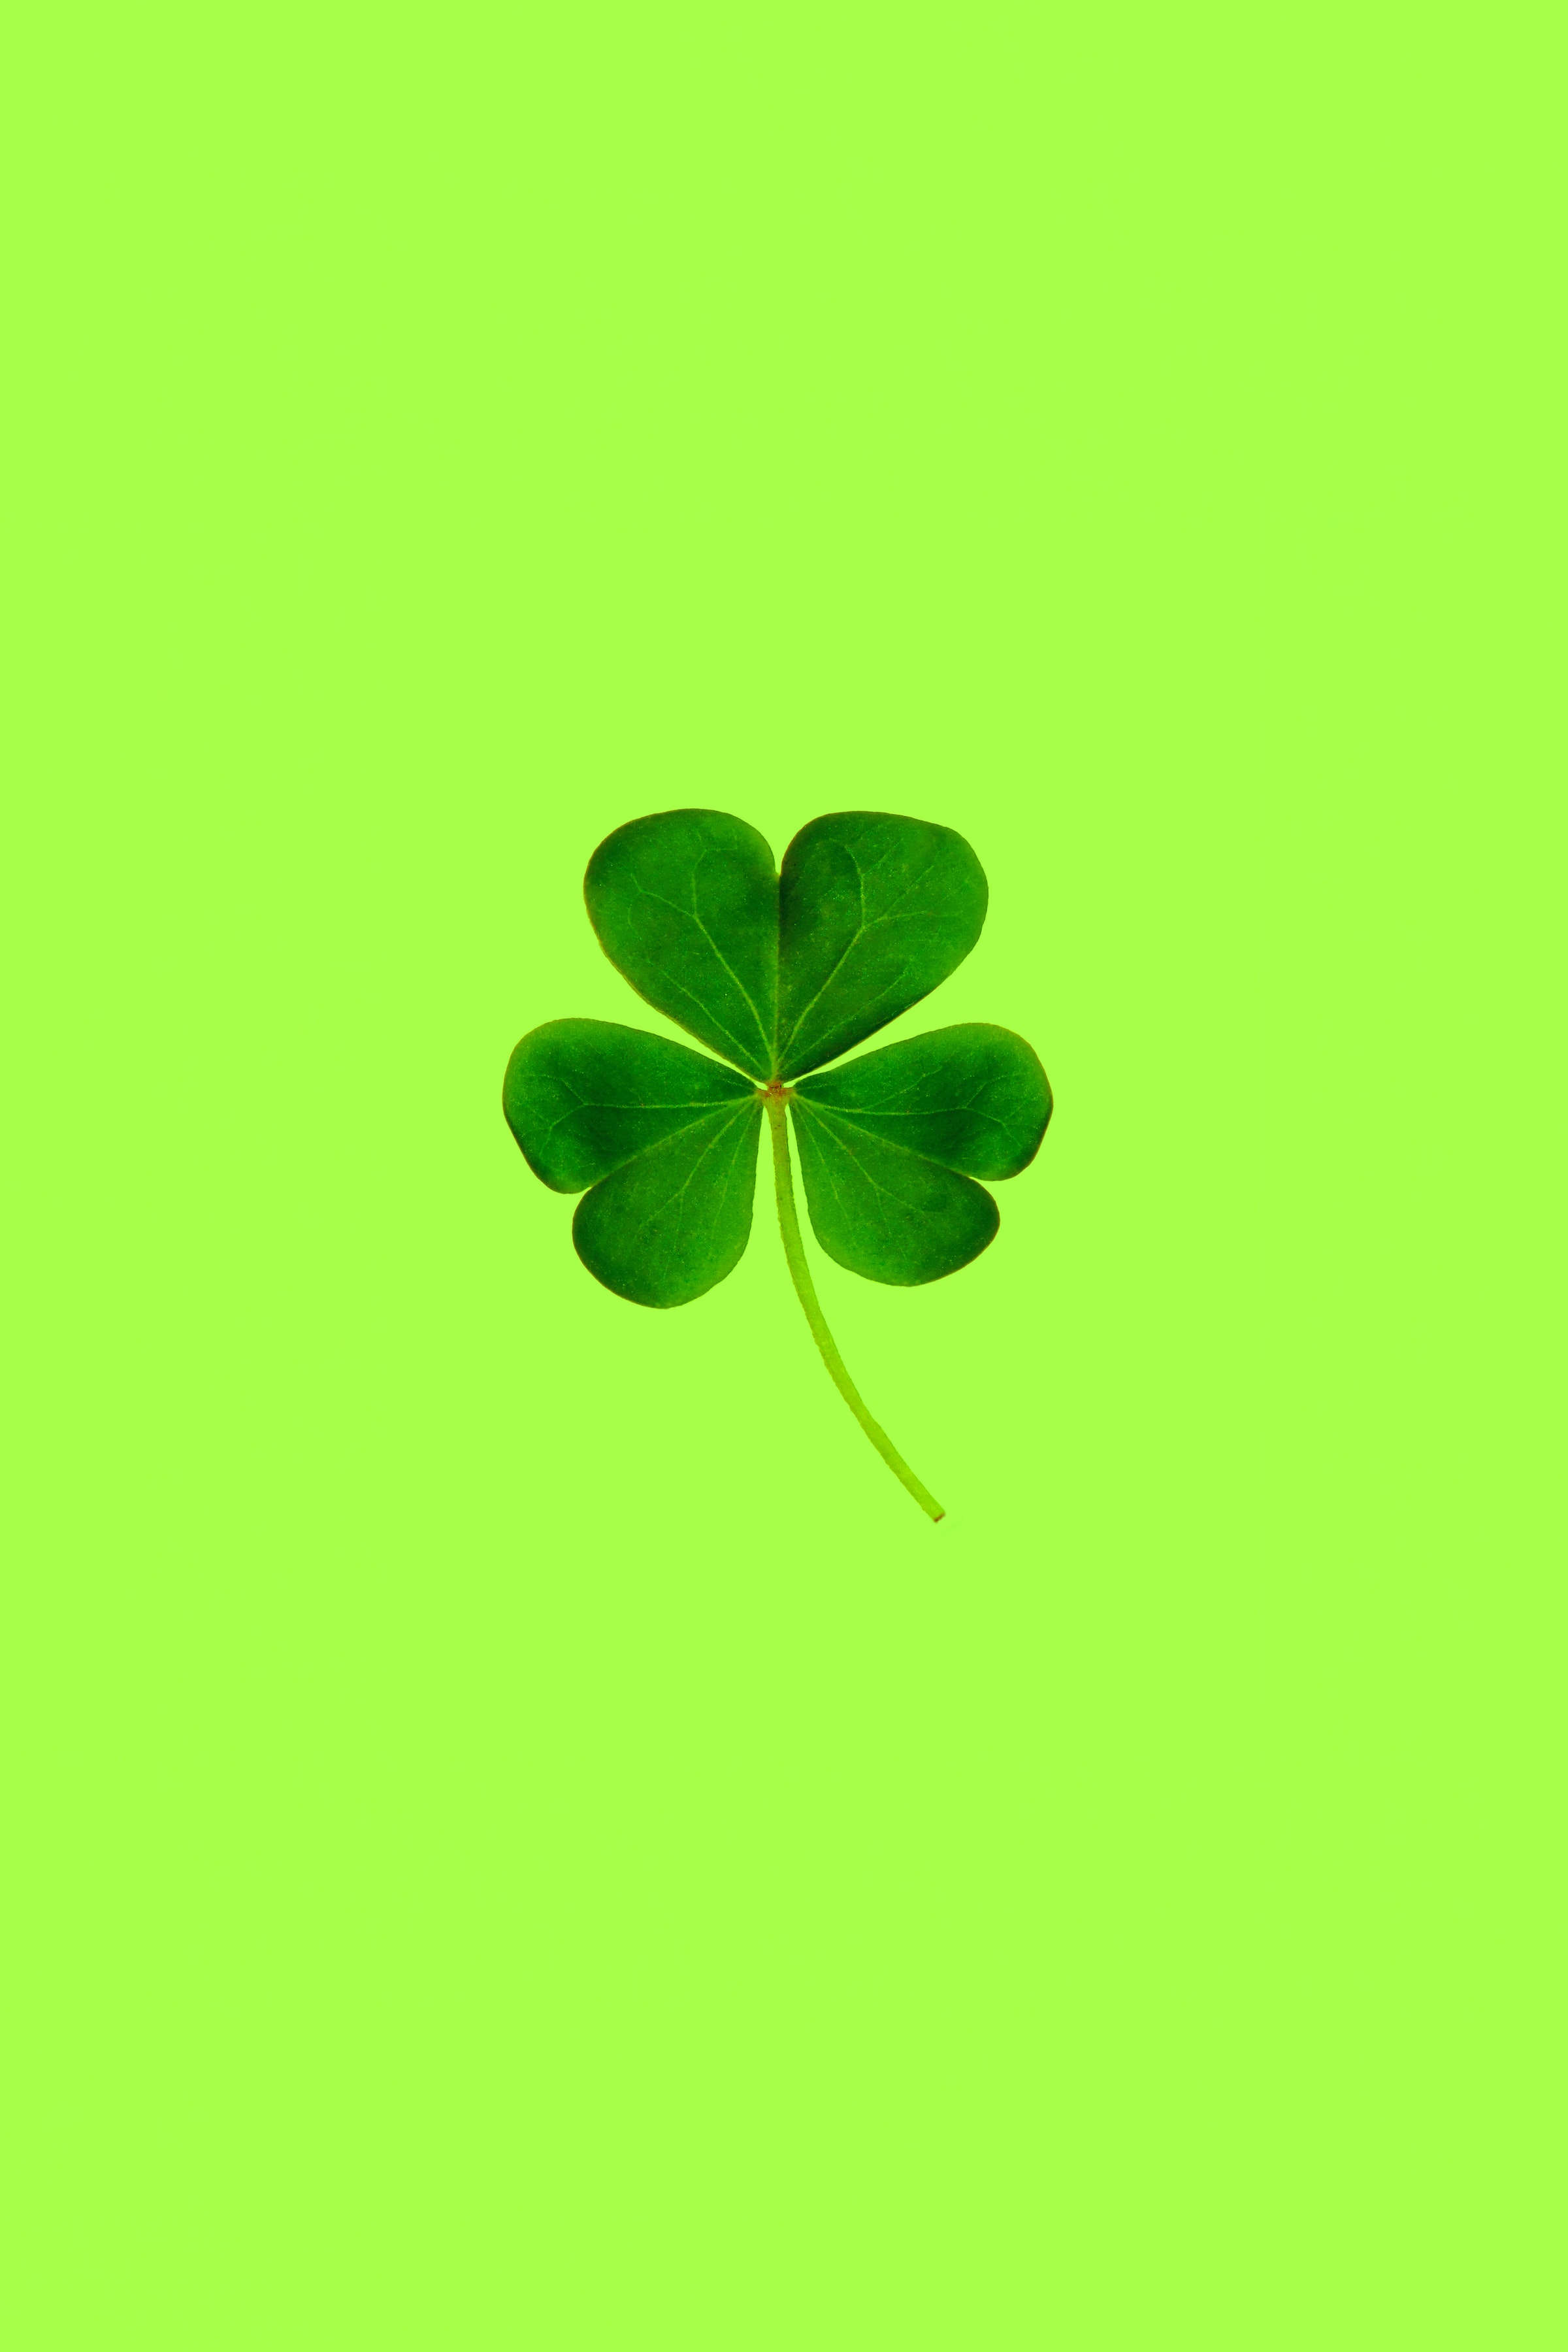 macro, minimalism, leaflet, green, clover wallpapers for tablet